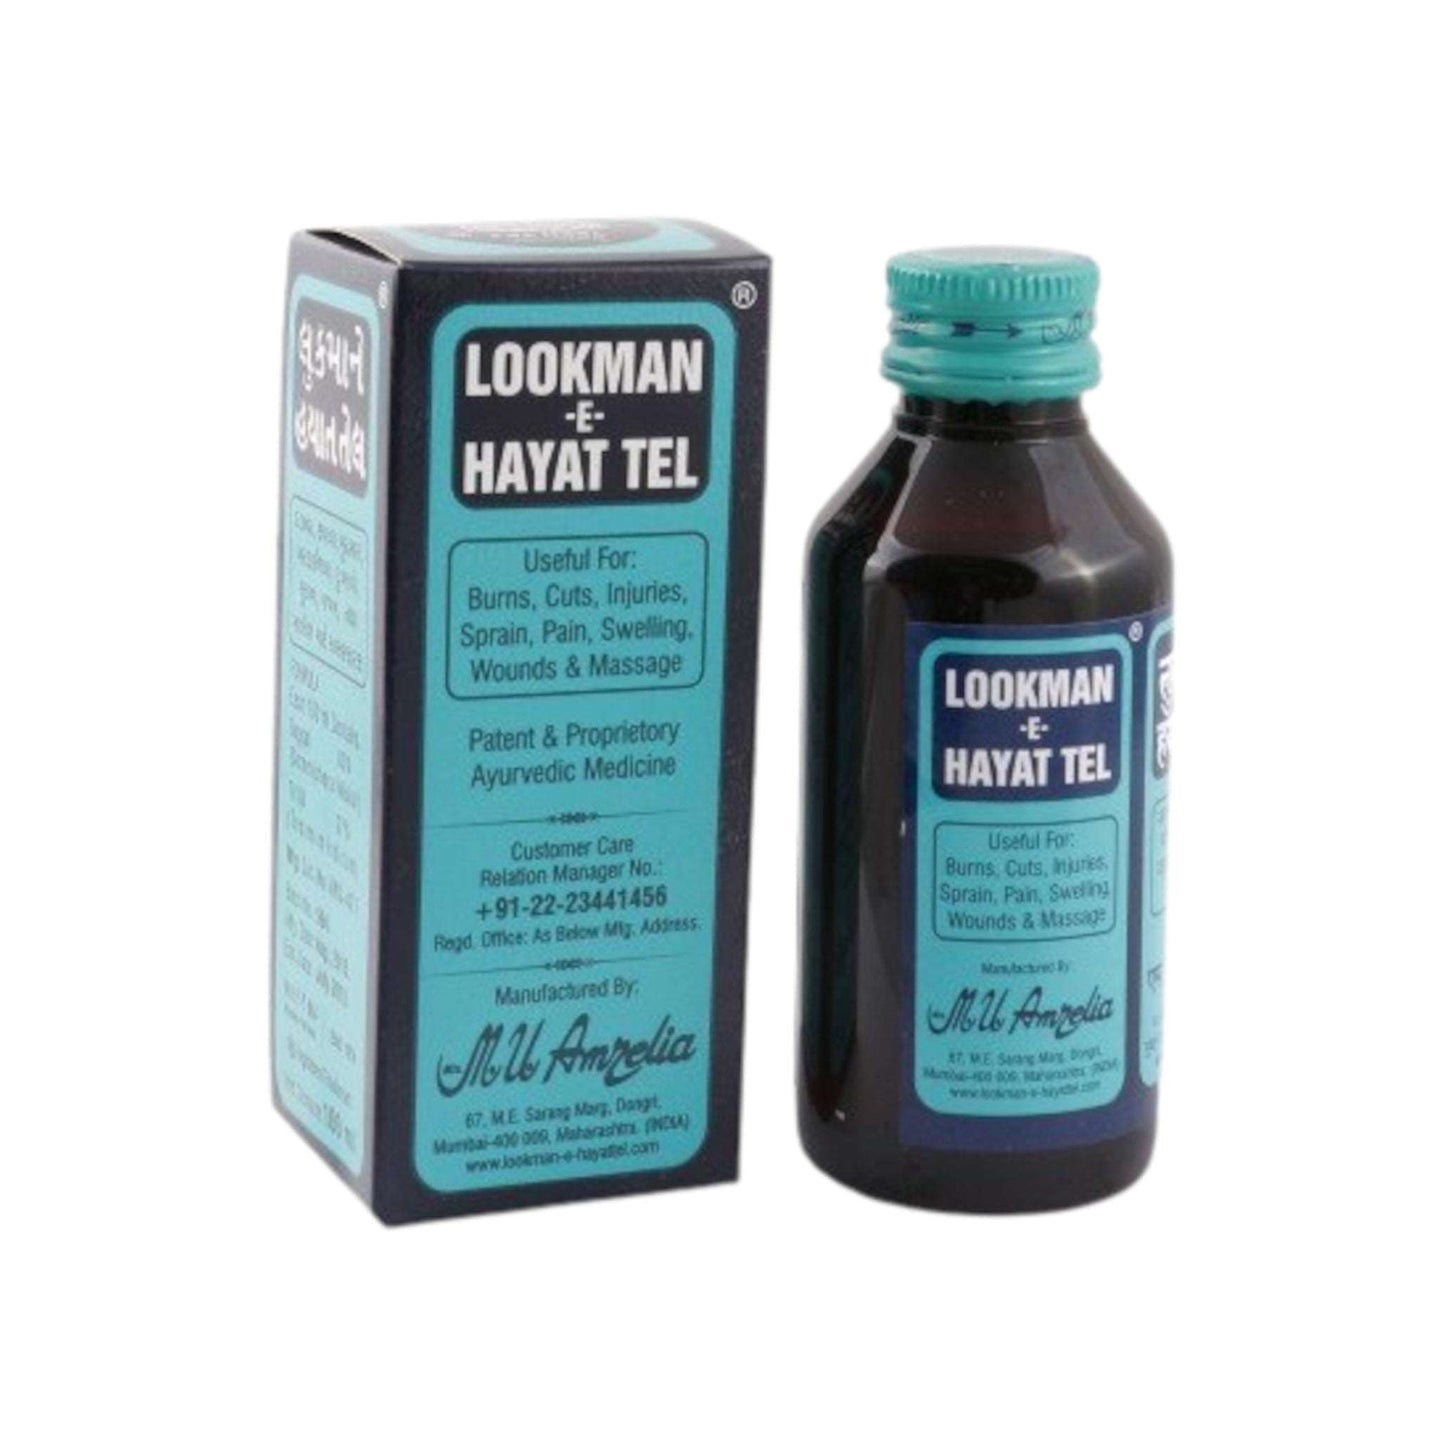 mage: Lookman-E-Hayat Tel Oil 50 ml - Healing oil for cuts, burns, pain relief, skin ailments, and more.